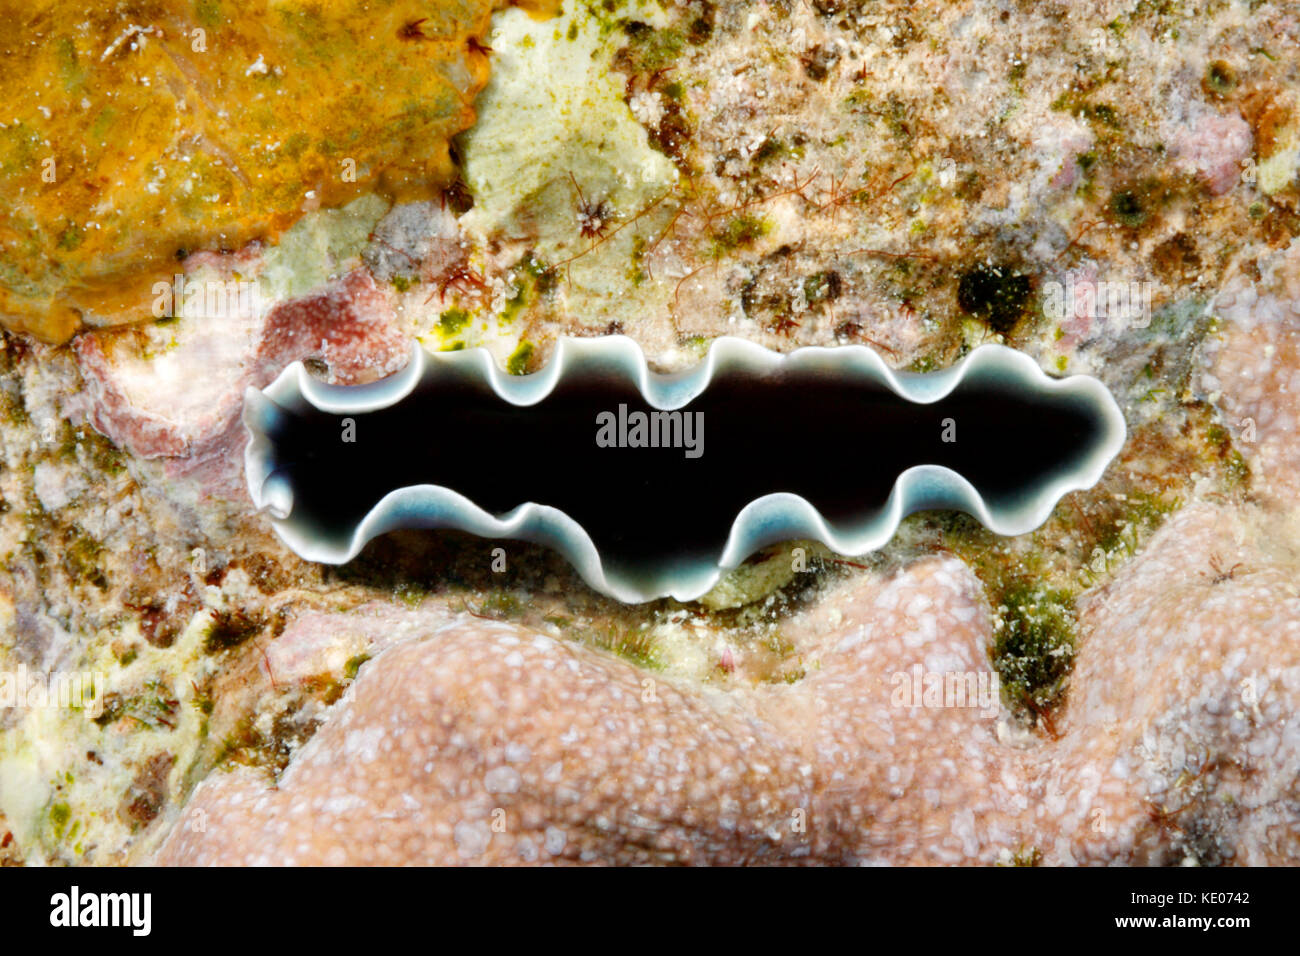 Marine Flatworm, Pseudoceros cf. nov sp. 9 - colour variation. According to experts, this flatworm is not yet described. Stock Photo